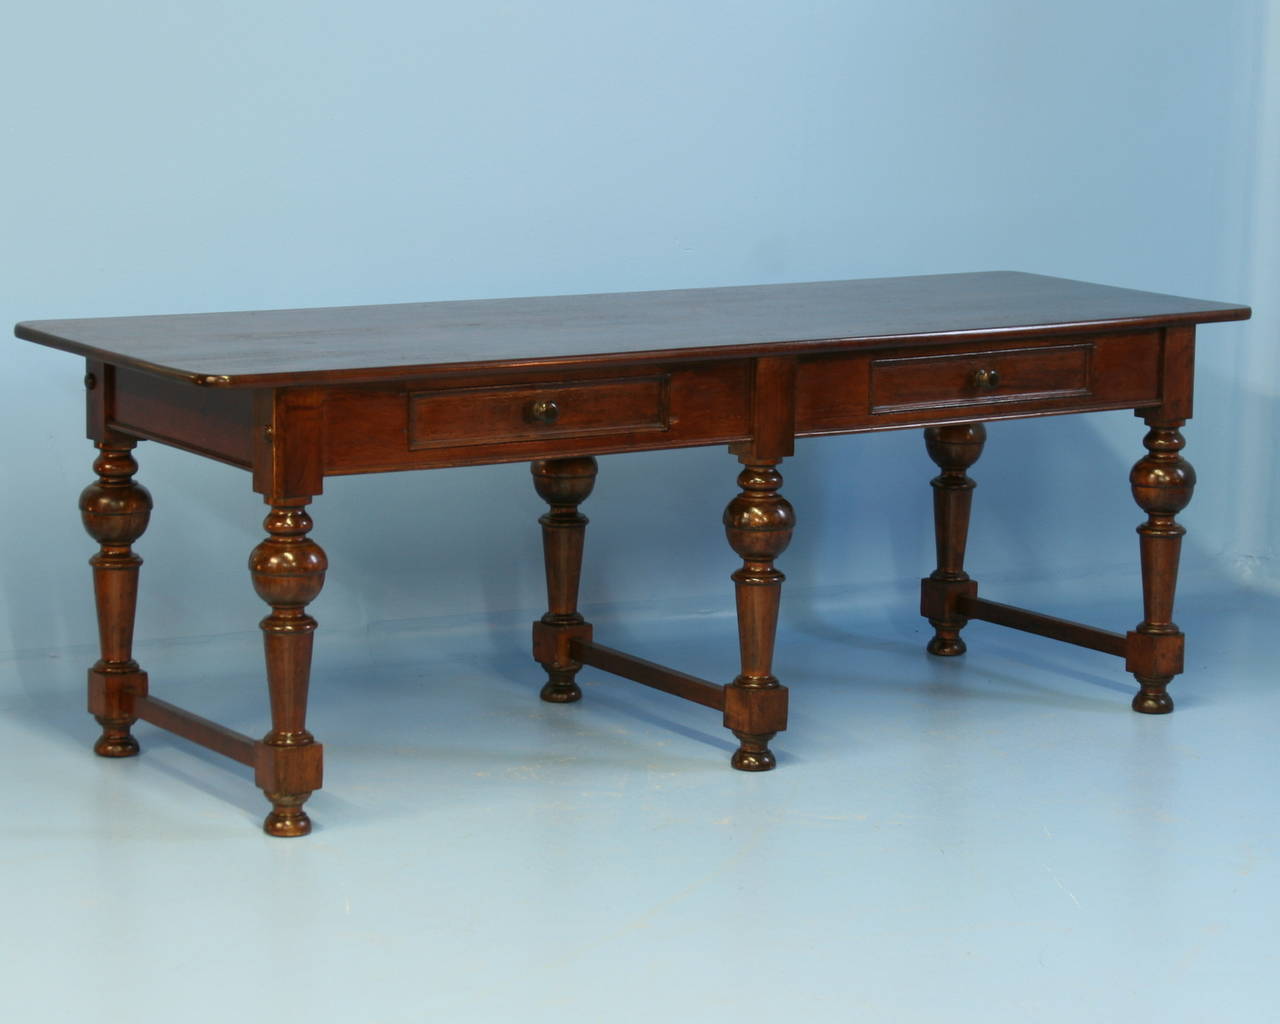 The amazing patina of this long table is due to the beauty of the rich mahogany top. The six turned legs with vertical stretchers add to the sophisticated look as well. With the 2 drawers, it likely served as a library table in its early life. This